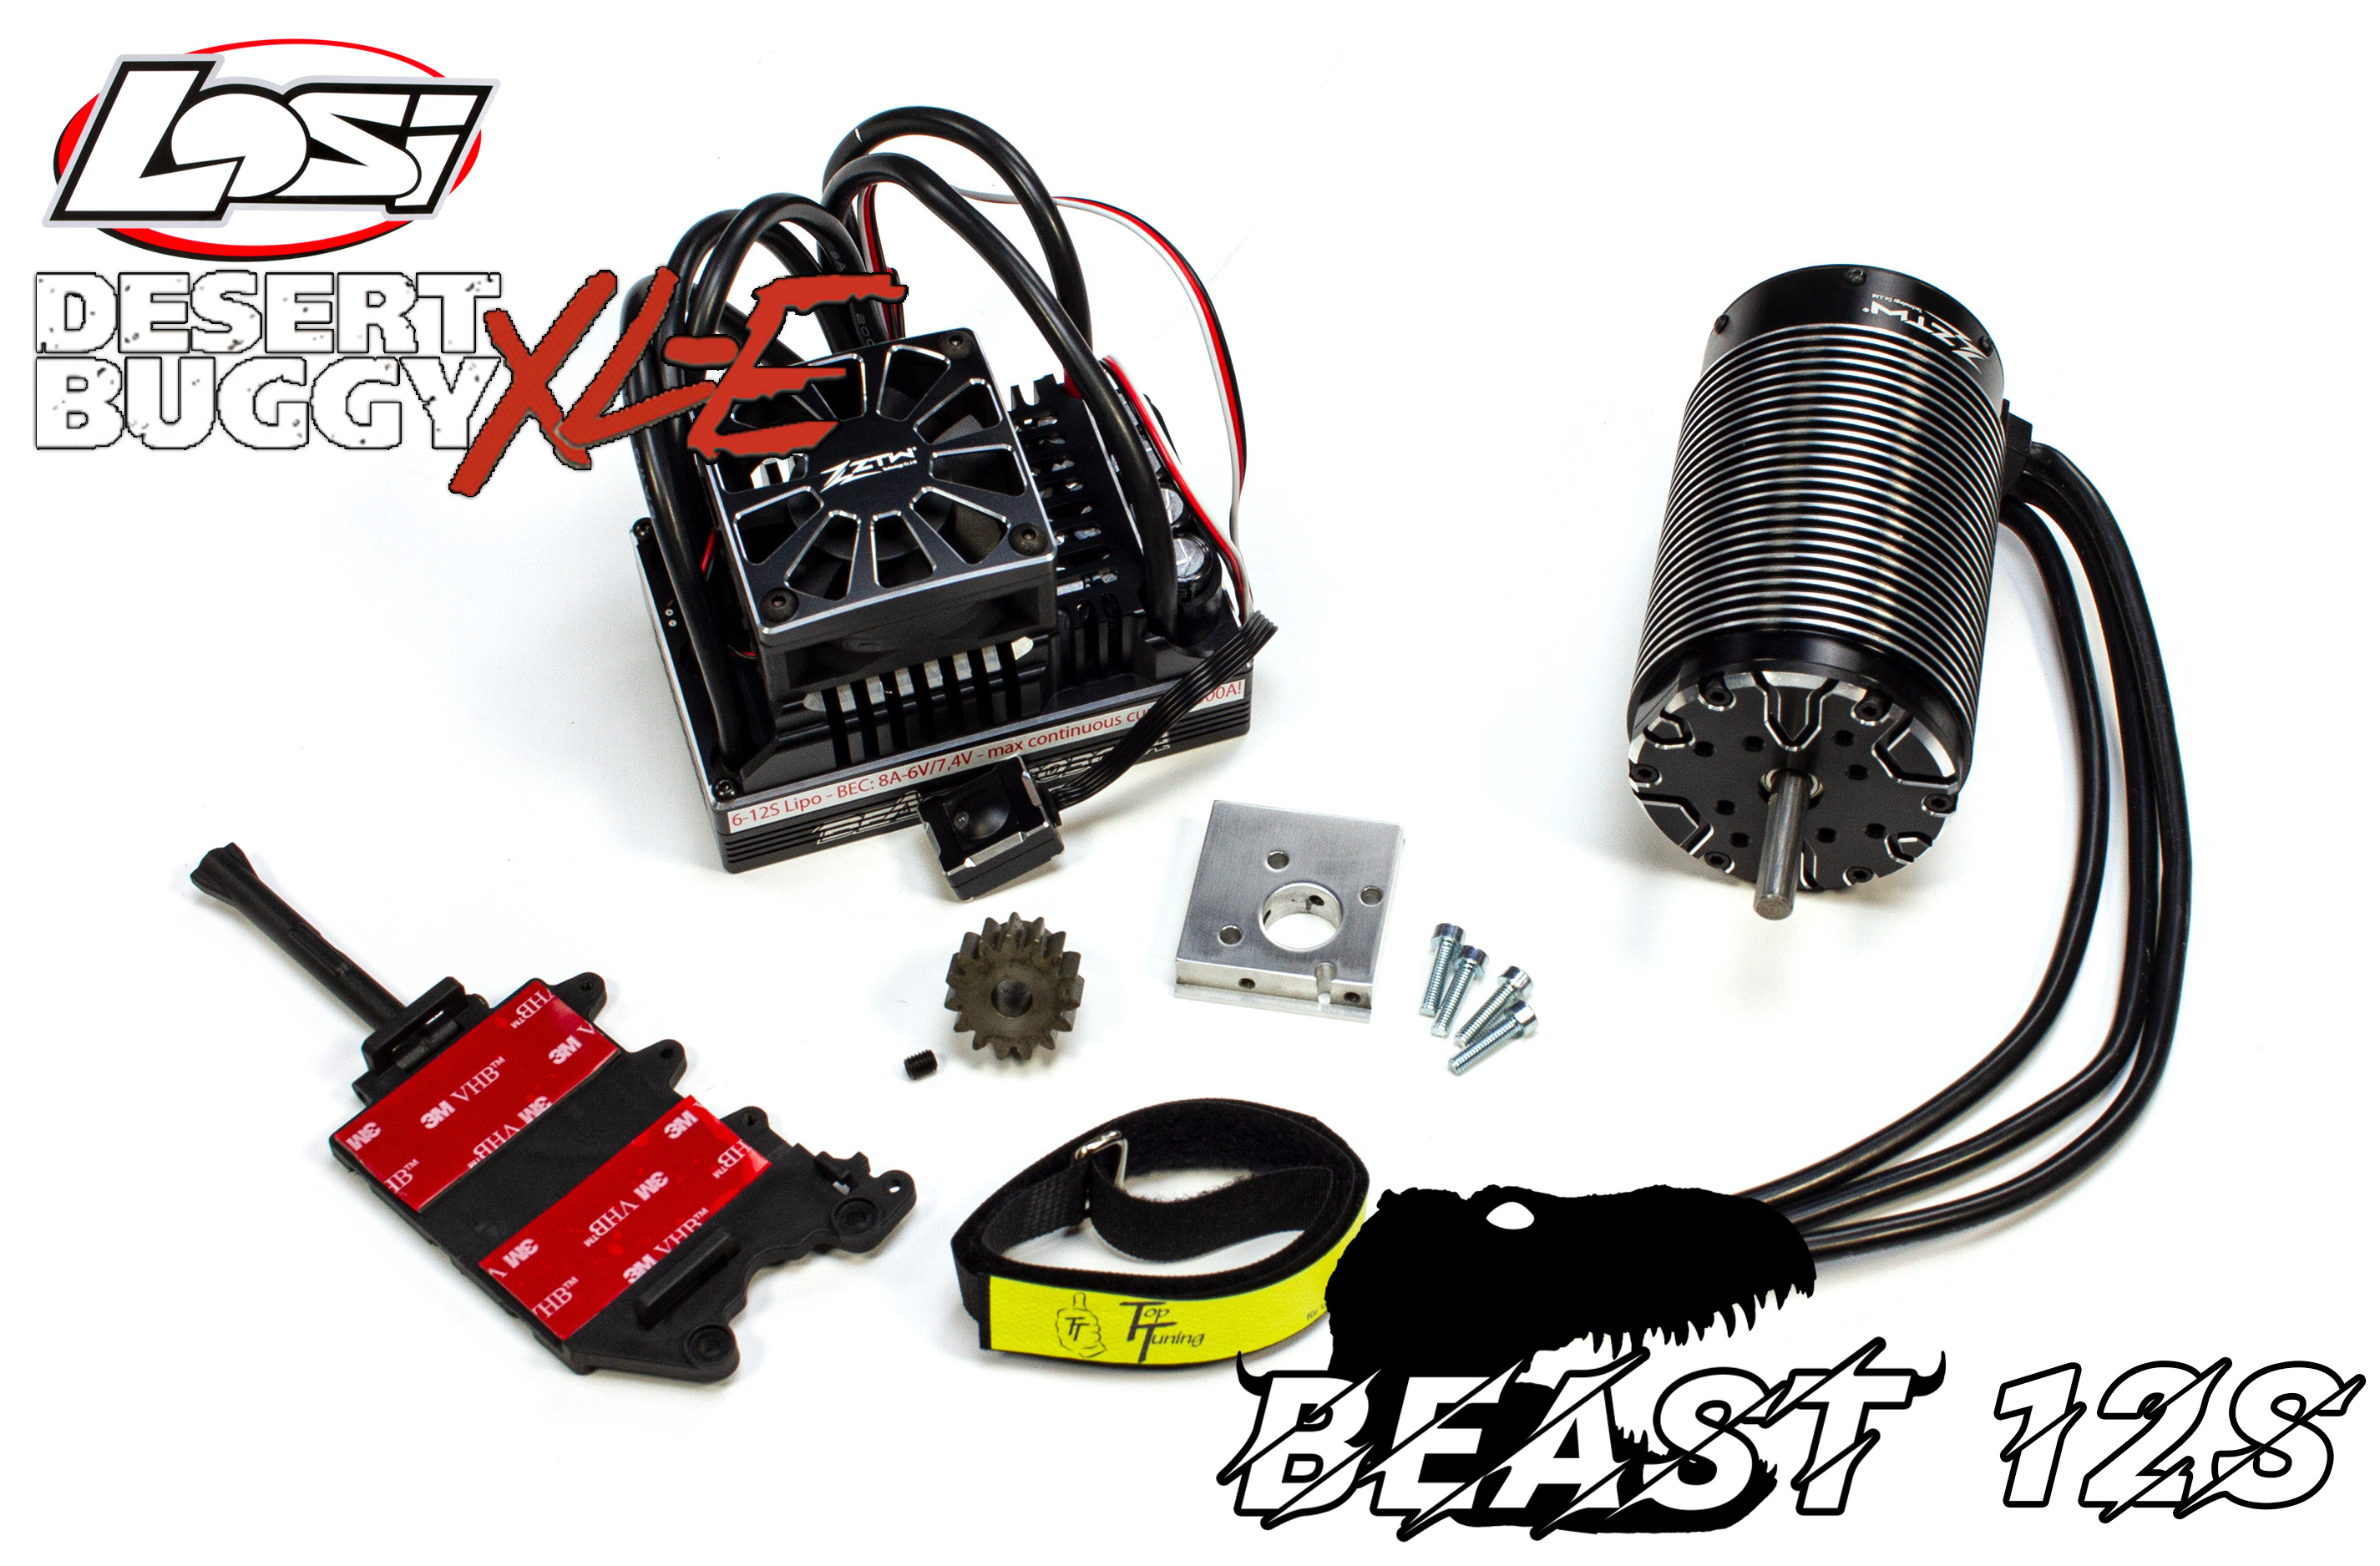 TT1025 Top Tuning BEAST Conversion kit for Losi Desert Buggy XL 2.0 / 12S